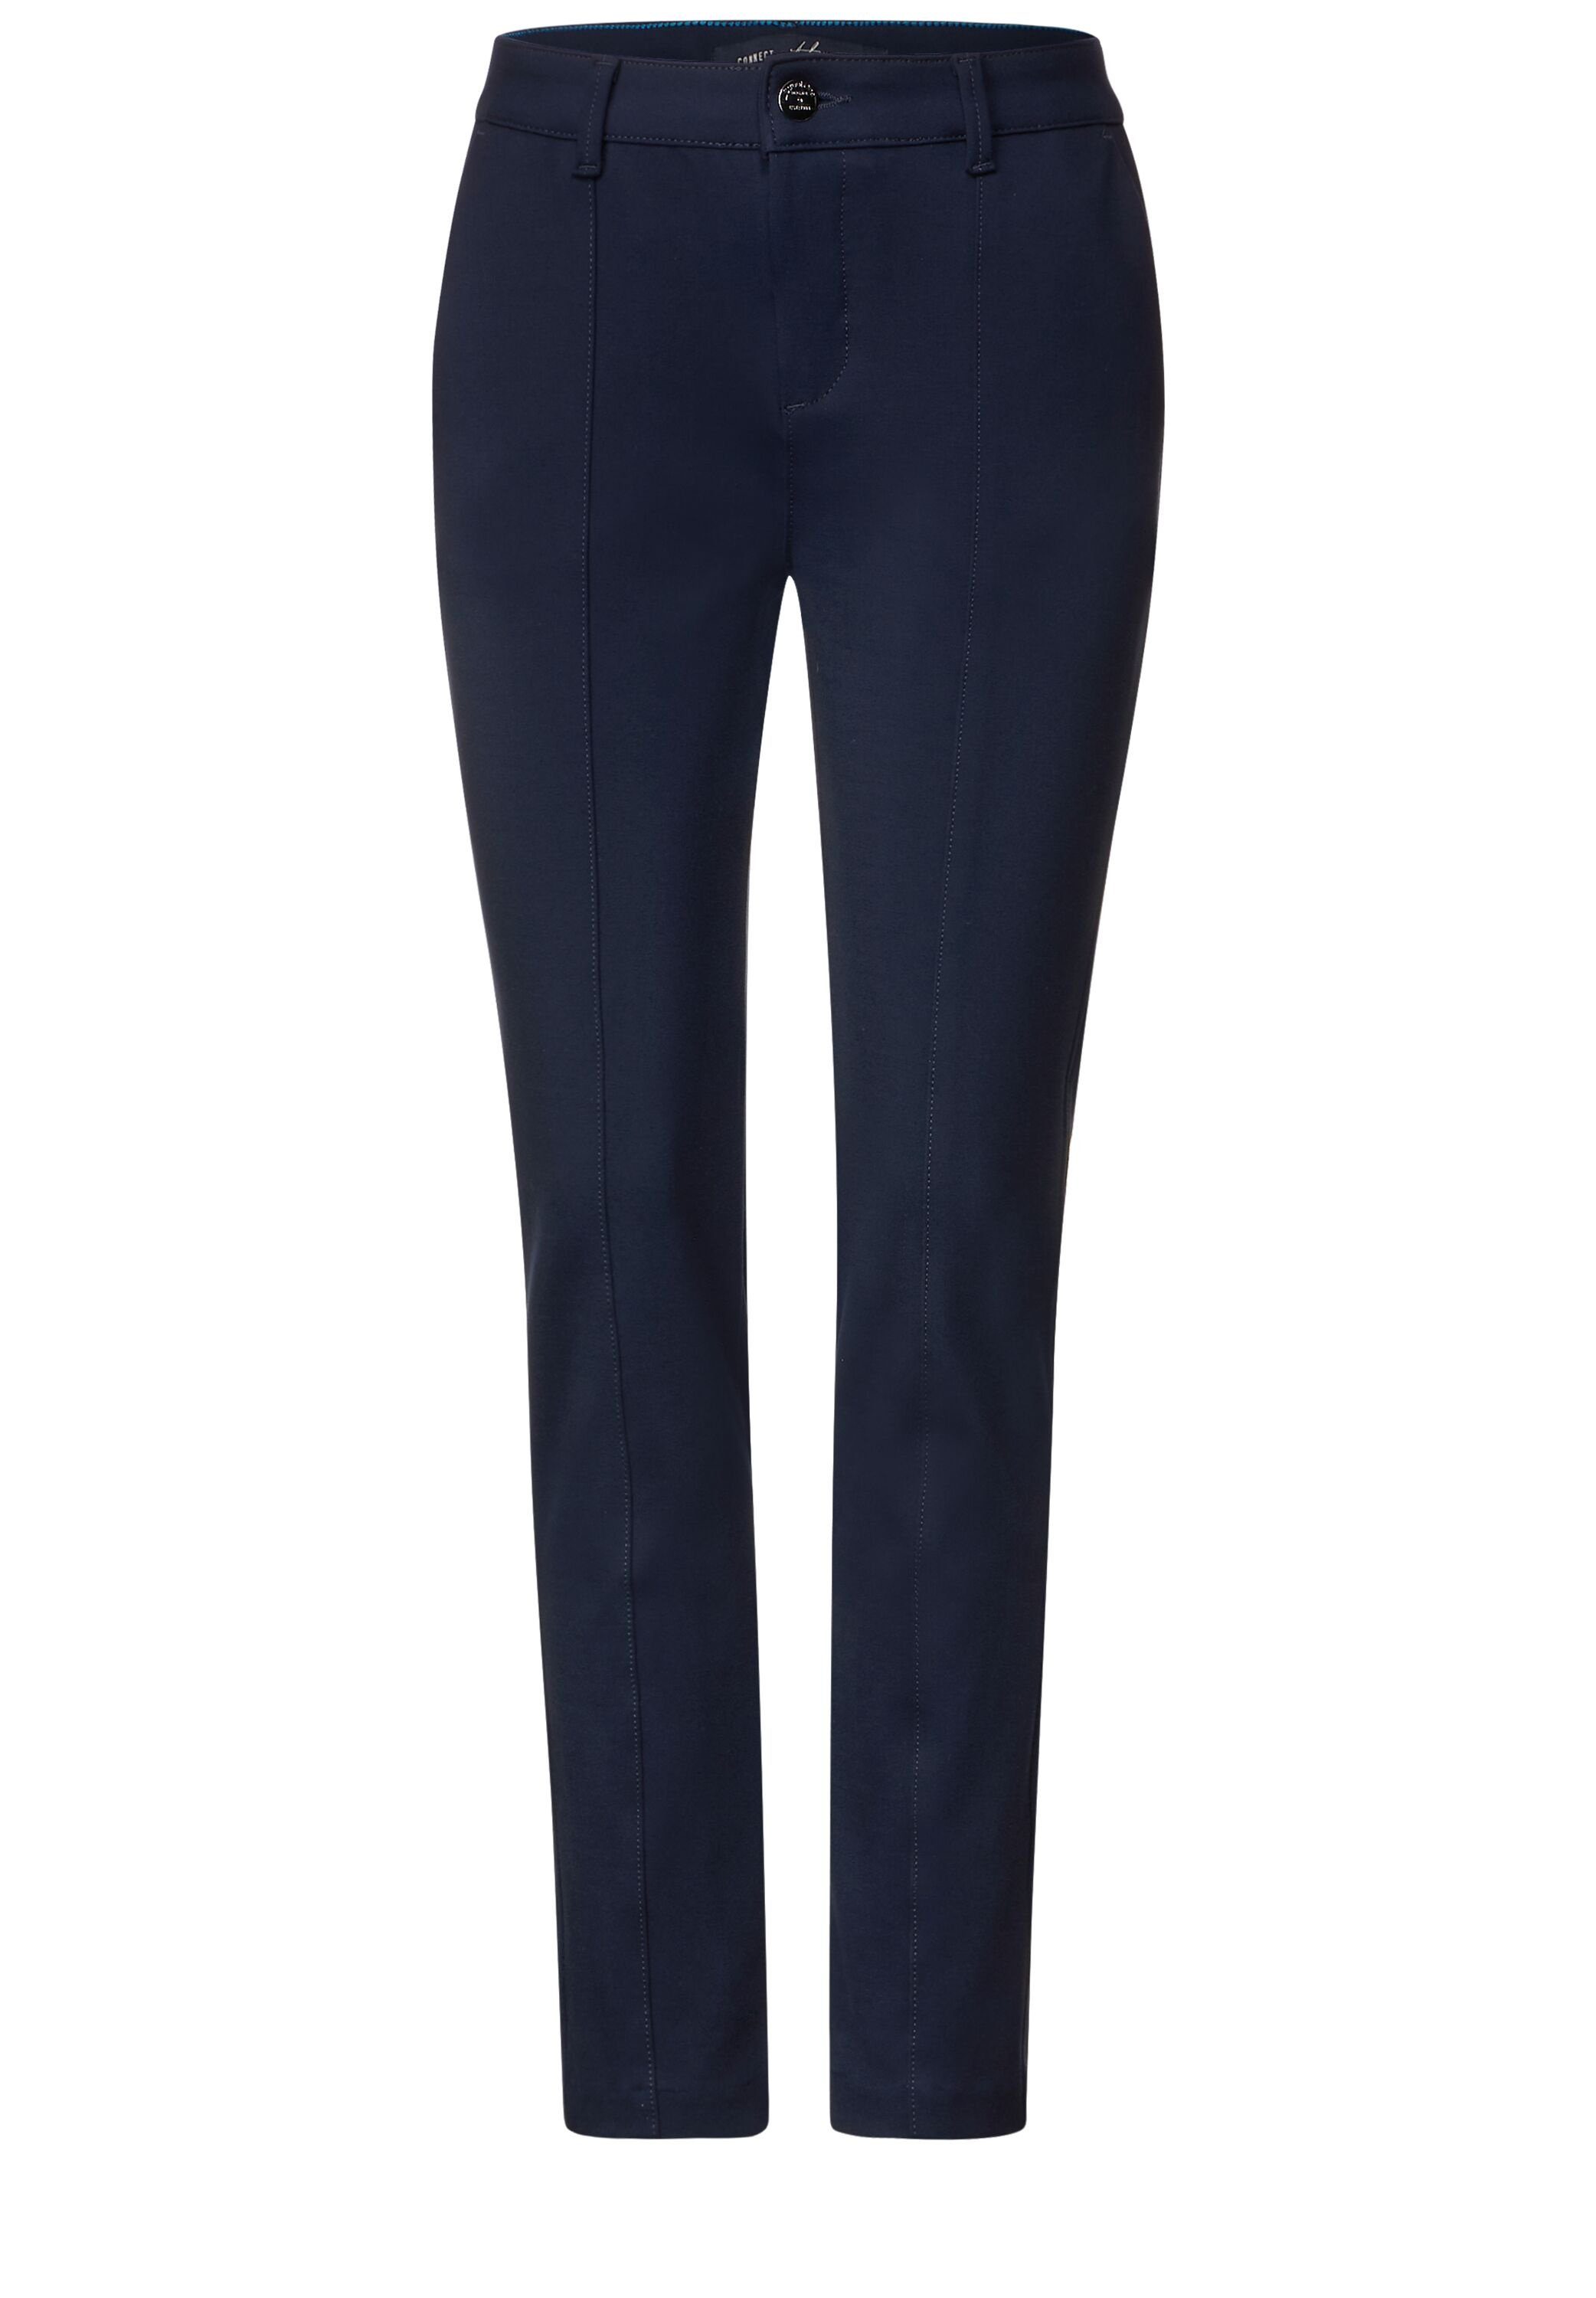 Chinohose STREET Casual blue ONE deep Fit Chinos